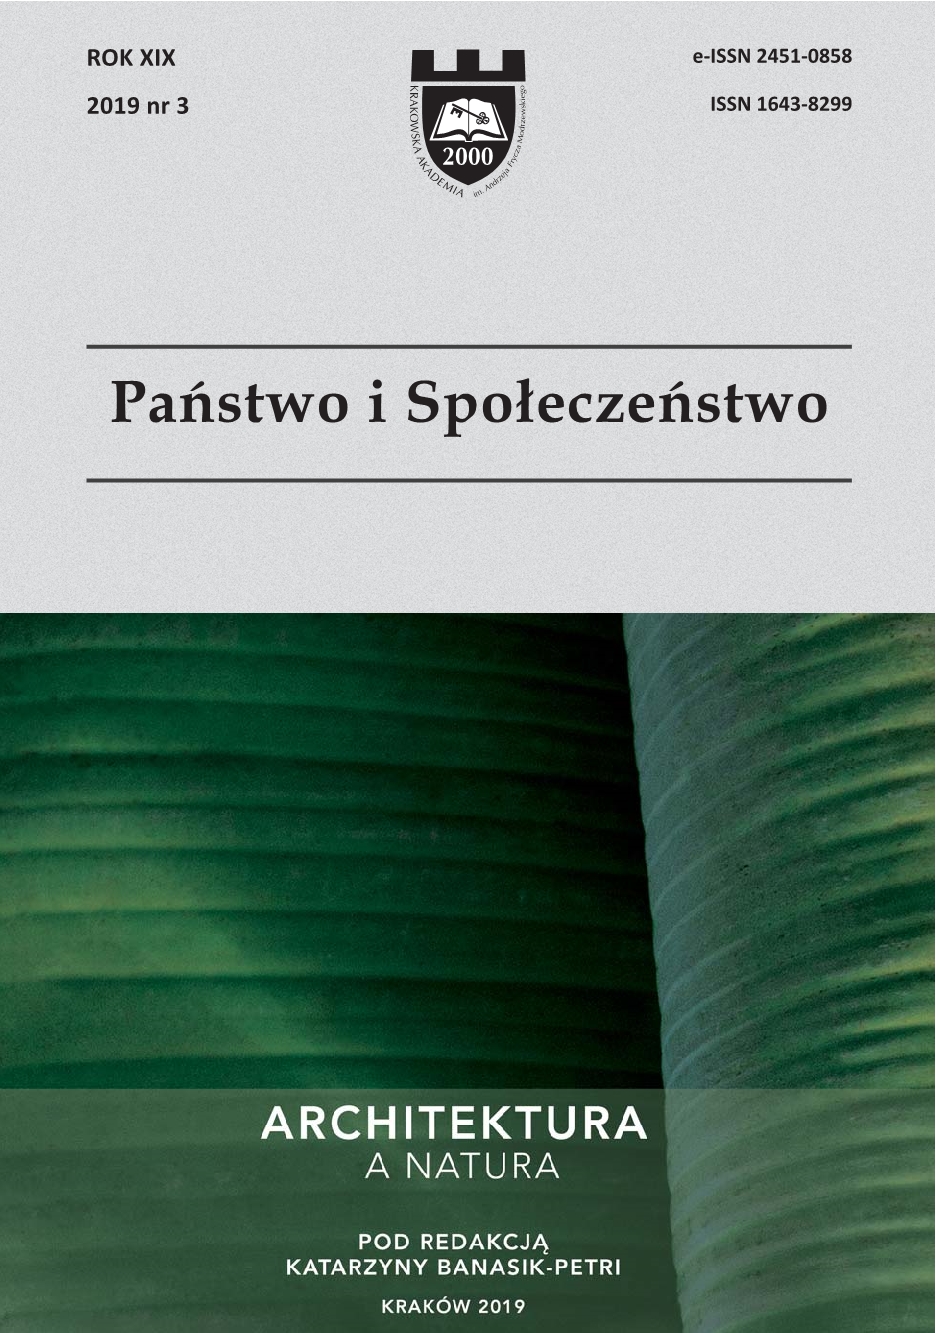 Relationships Between Architecture and Nature in the Context of the Climate Crisis.The Presence of the Subject Matter in Teaching on the Example of Student Projects Prepared at the Faculty of Architecture and Fine Arts Andrzej Frycz Modrzewski Krakow Cover Image